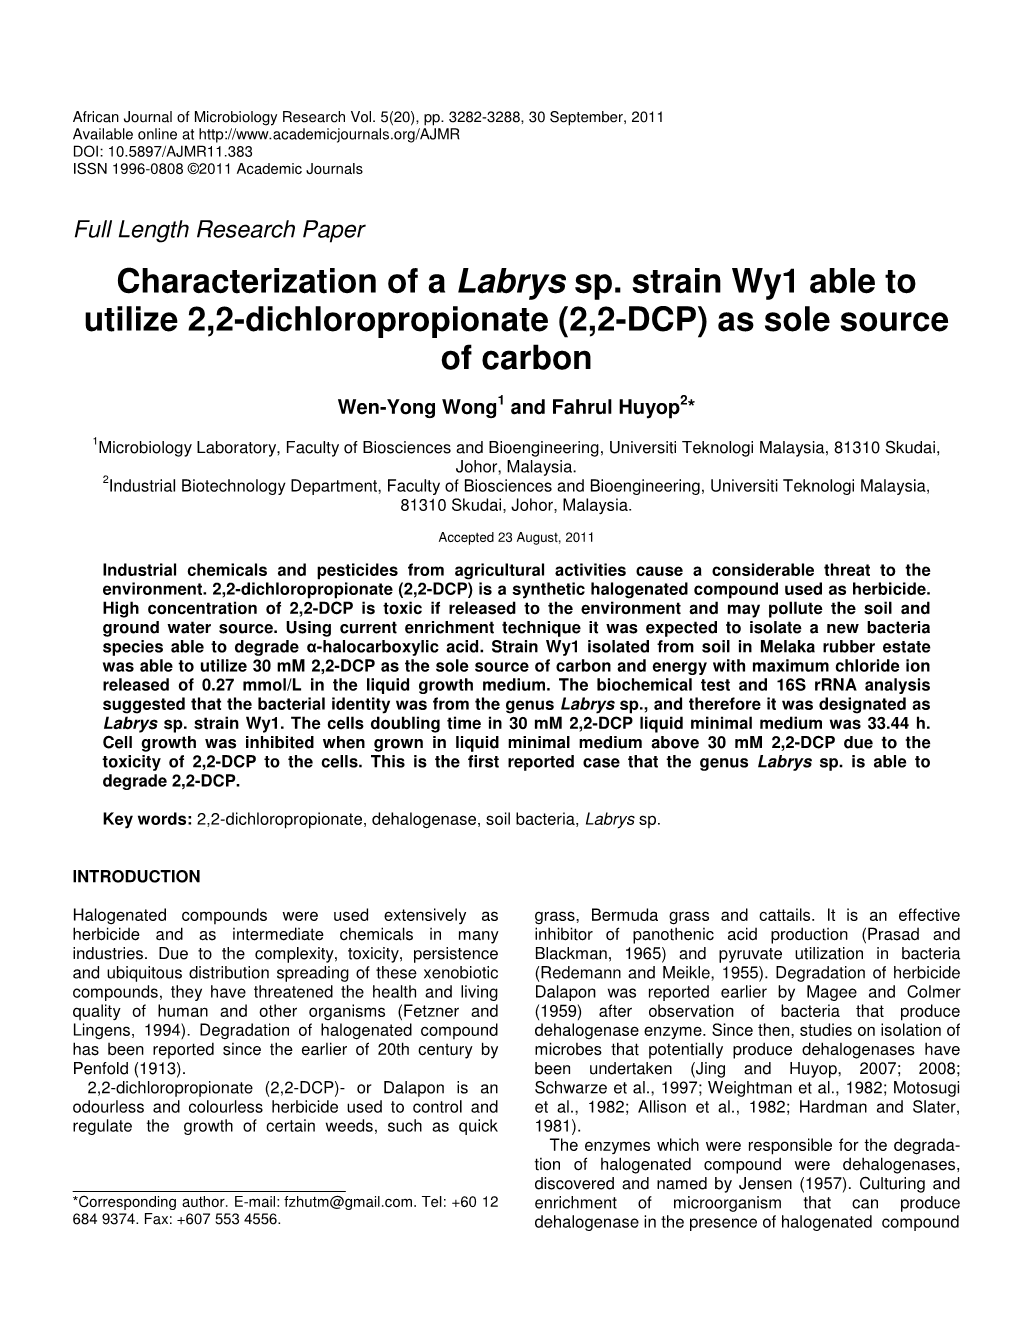 Characterization of a Labrys Sp. Strain Wy1 Able to Utilize 2, 2